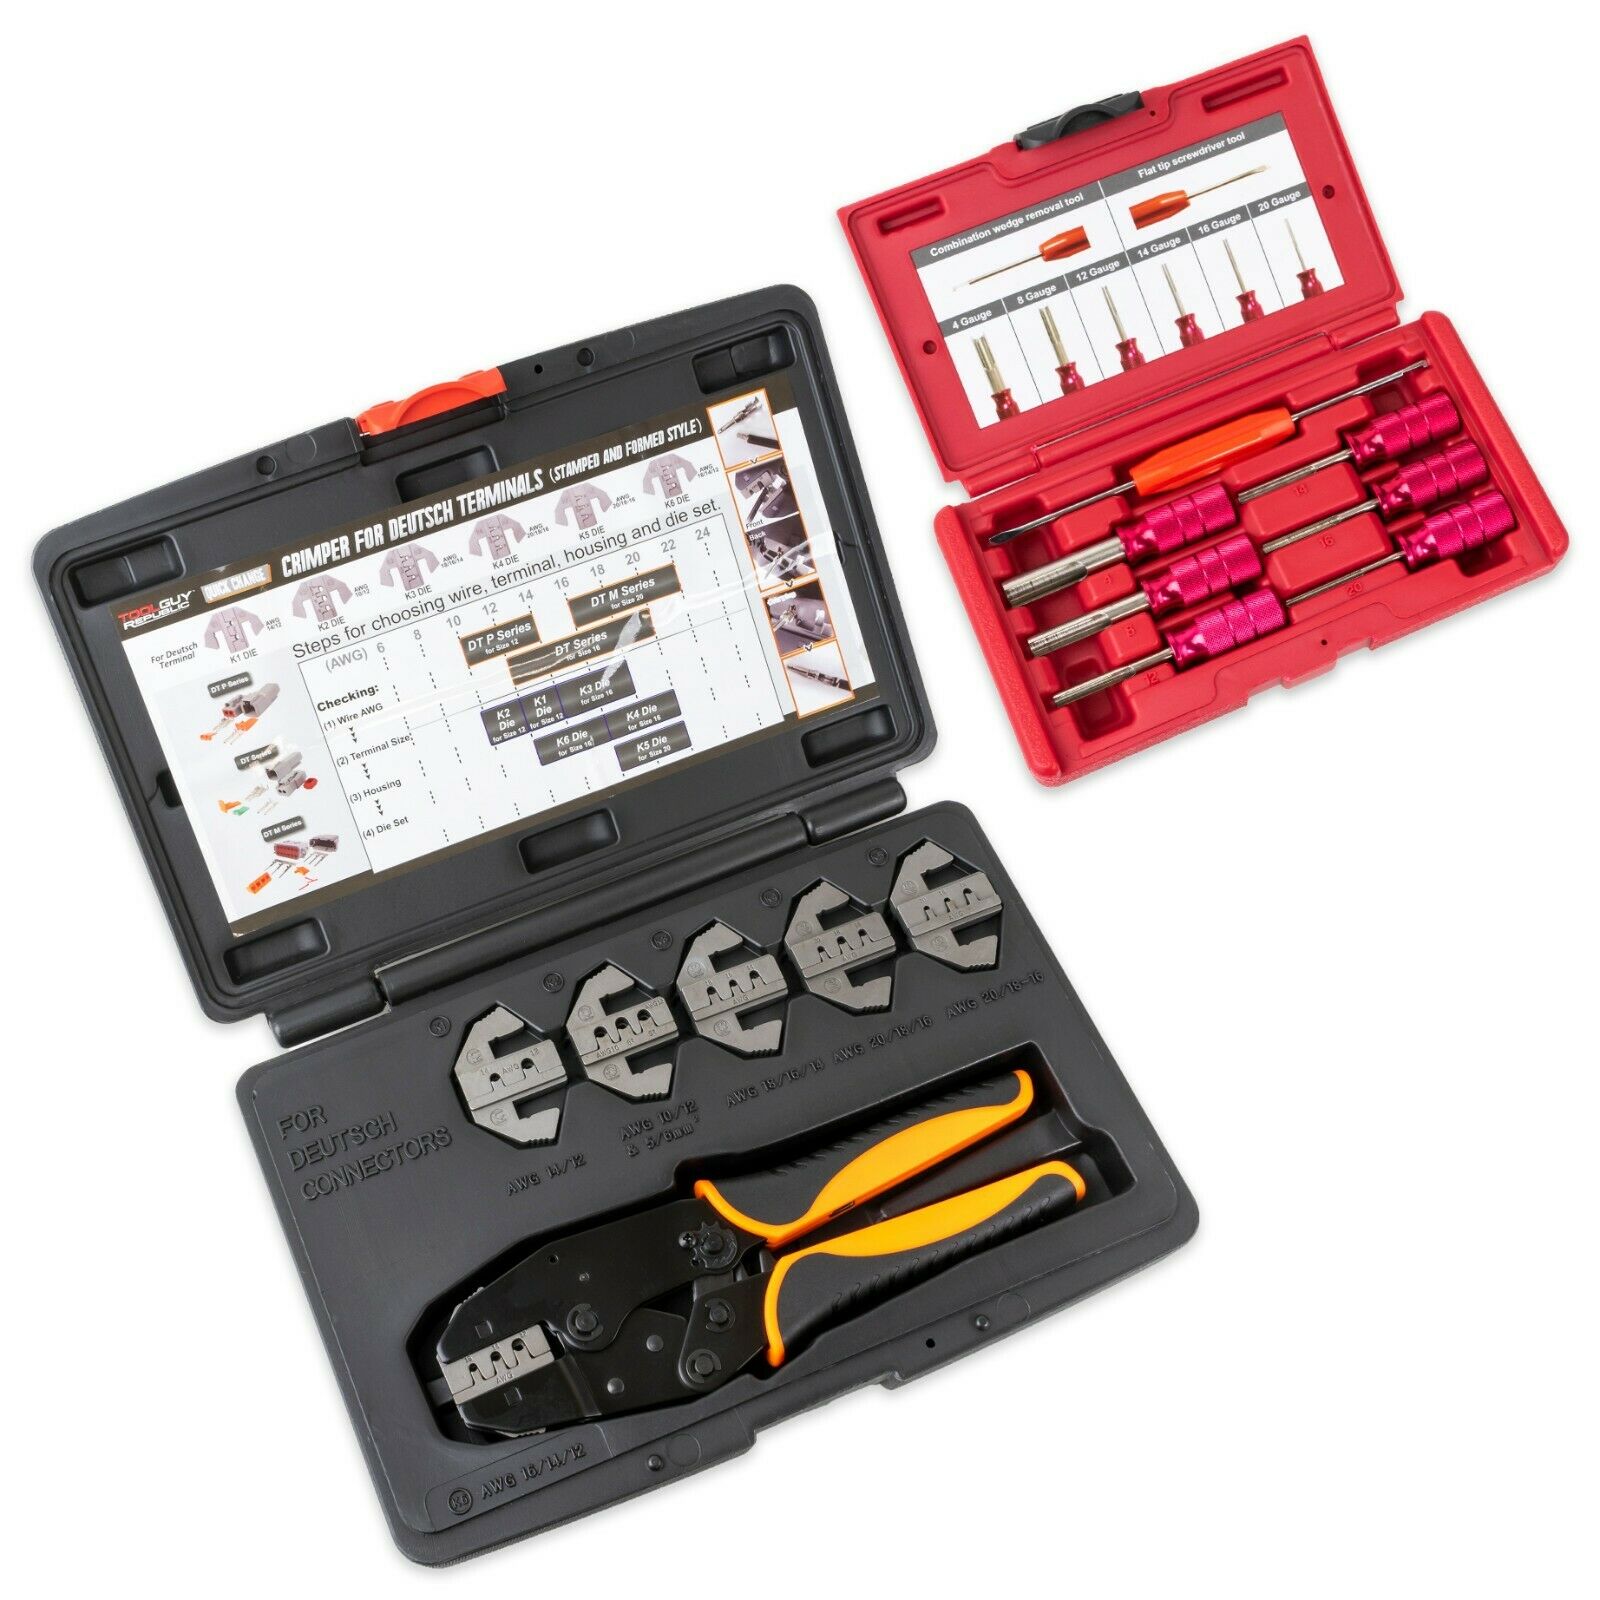 Deutsch Terminal Ratcheting Crimping Tool- Includes 6 Quick Change Dies PLUS 7pc Deutsch Terminal Release/Removal Tool Kit - Tool Guy Republic